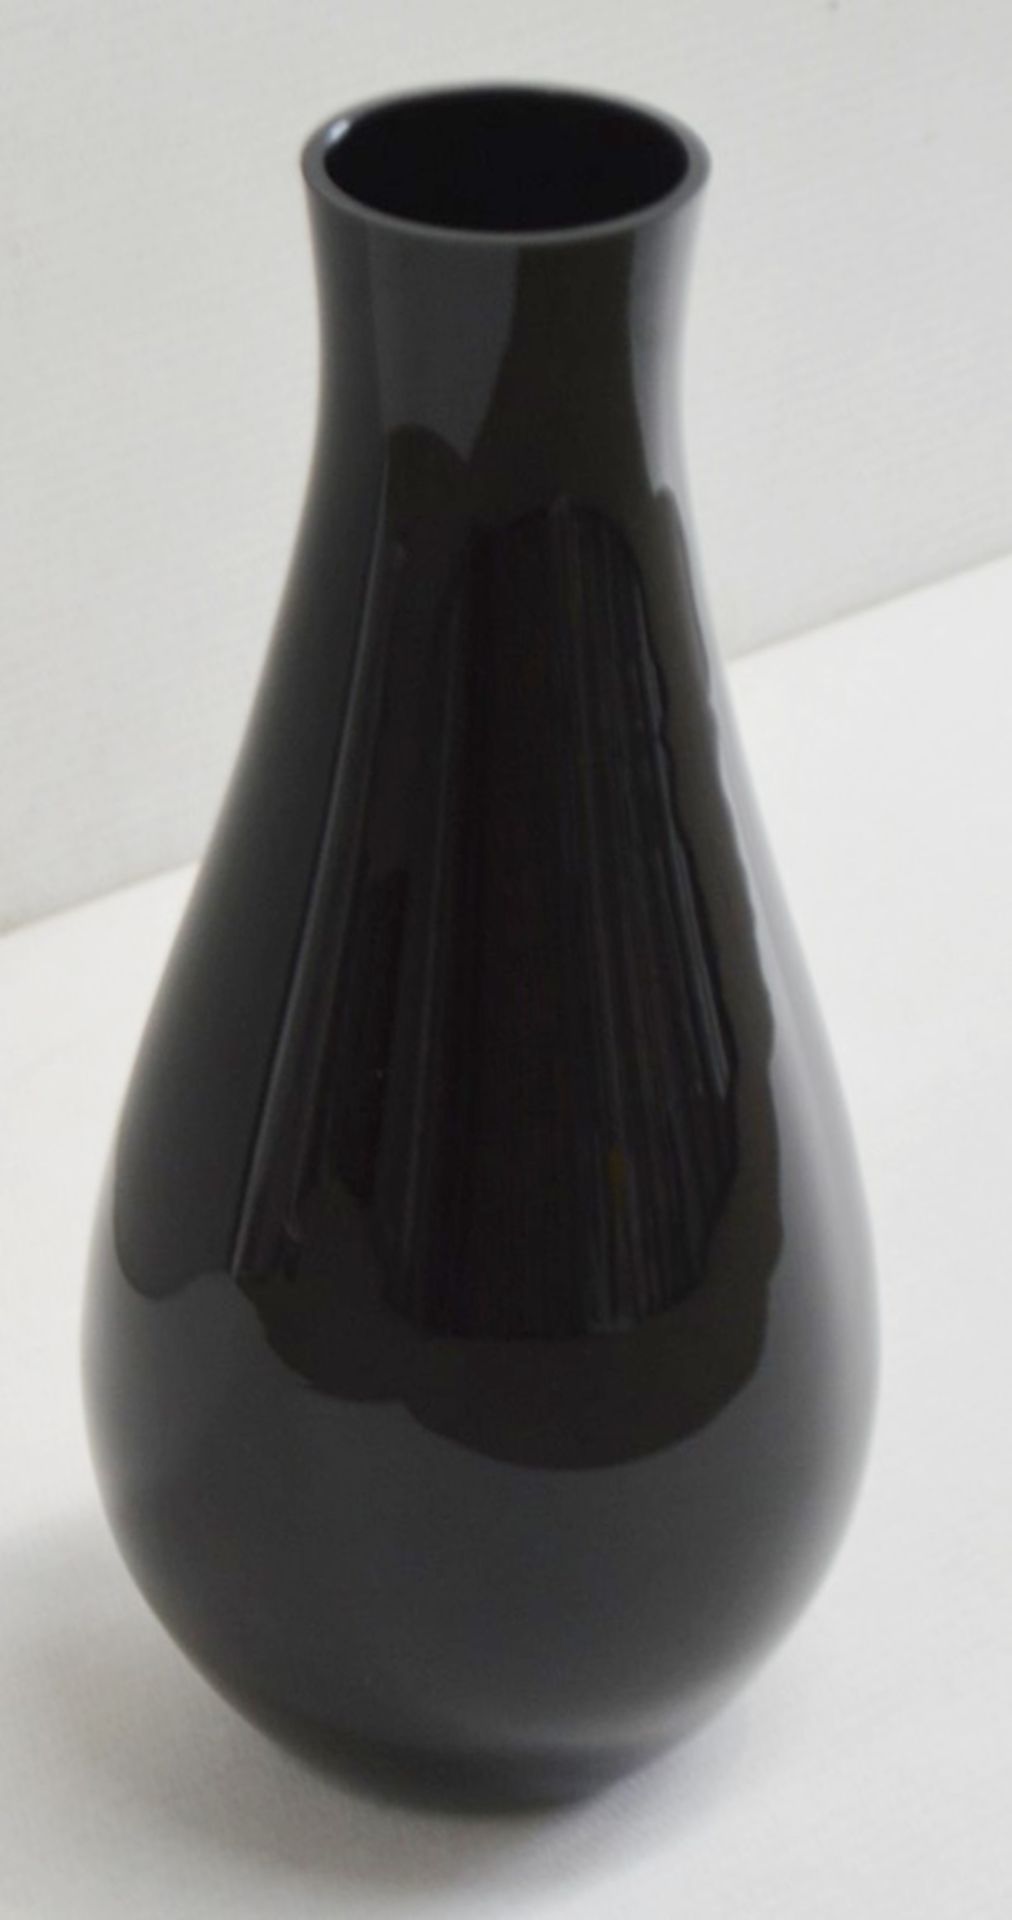 1 x Large Flower Vase In Black Glass - Preowned, From An Exclusive Property - Dimensions: H56 x - Image 3 of 5